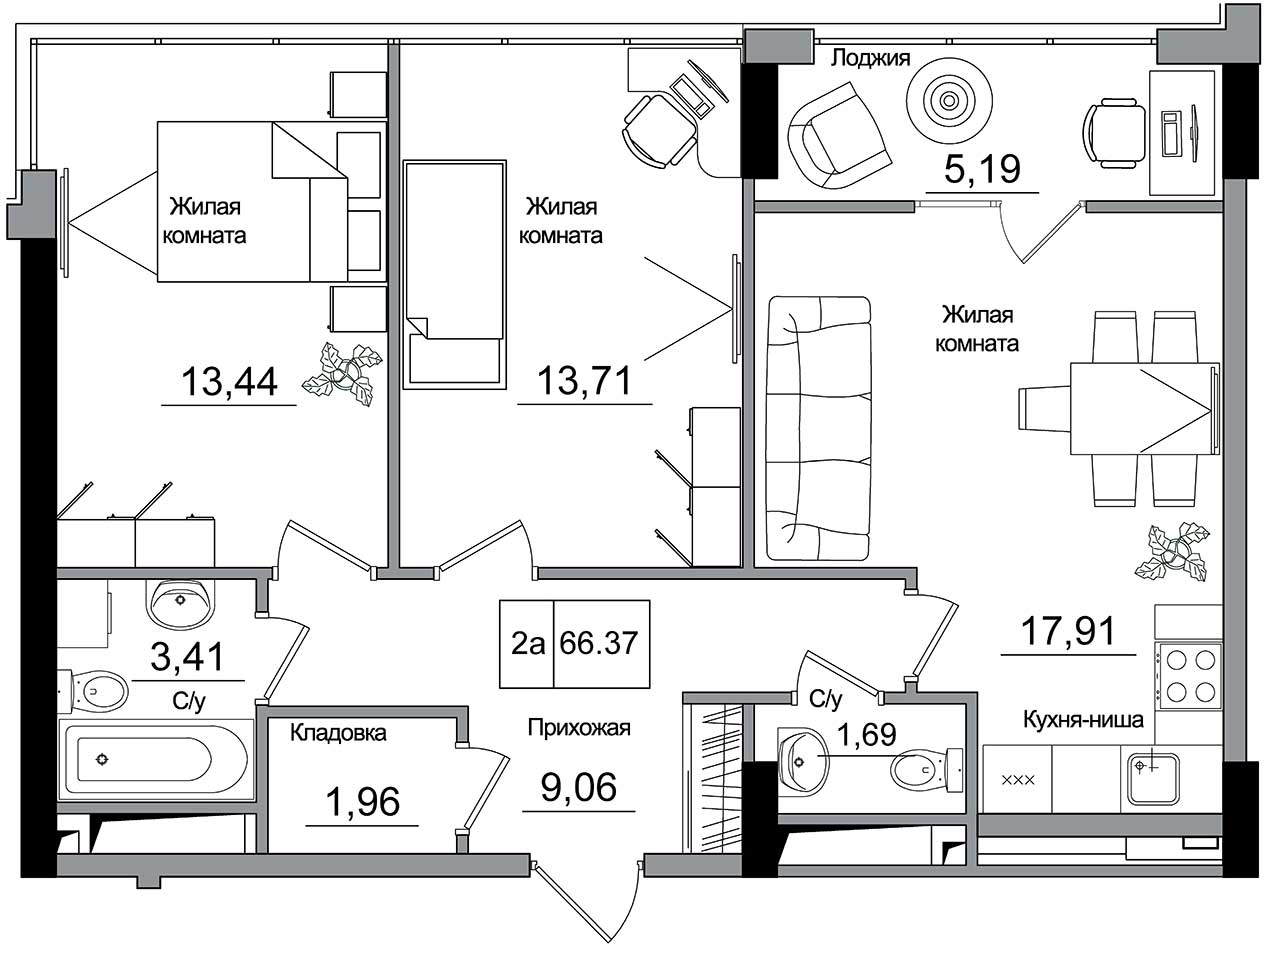 Planning 2-rm flats area 66.37m2, AB-16-11/00006.